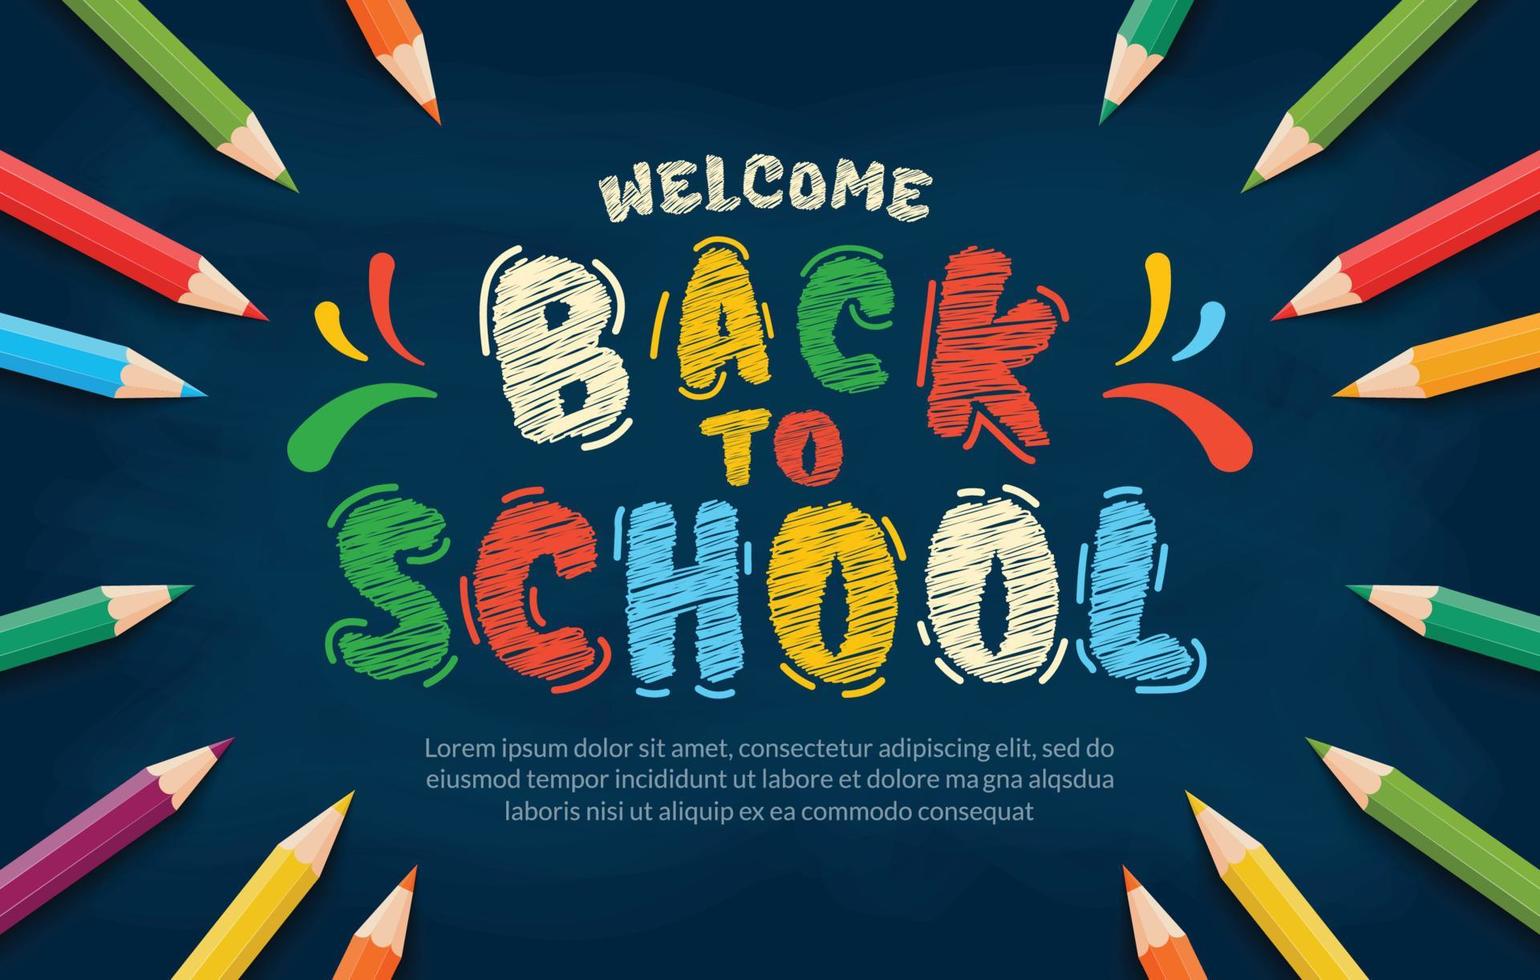 Chalk drawn back to school lettering with colored penicls background. Online courses, learning and tutorials Web page template. Online education concept vector